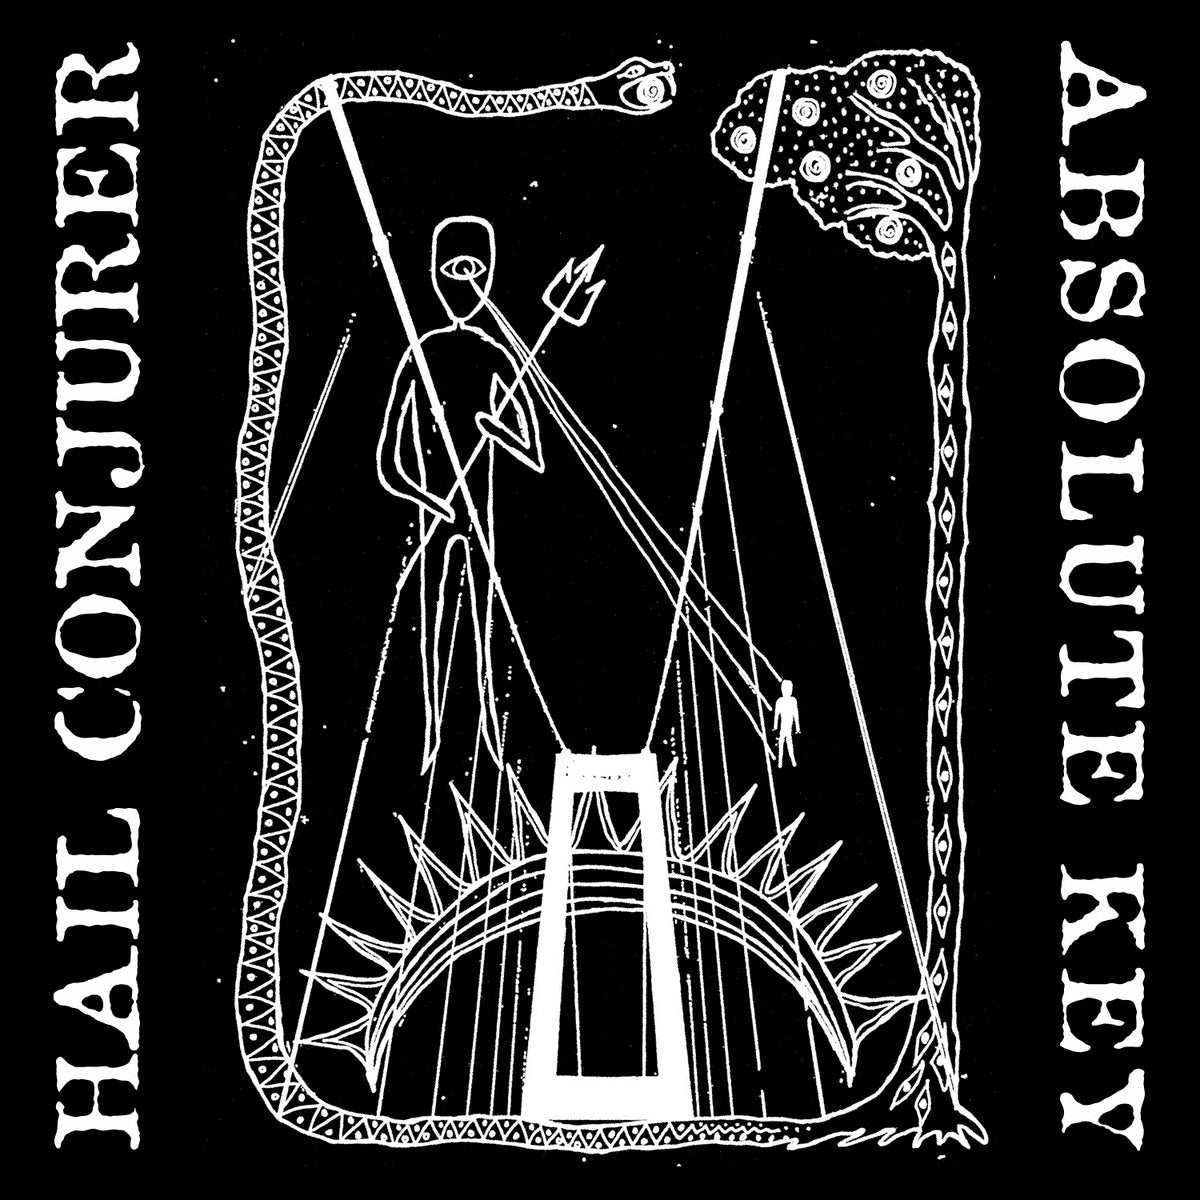 Hail Conjurer & Absolute Key - Trident and Vision CD